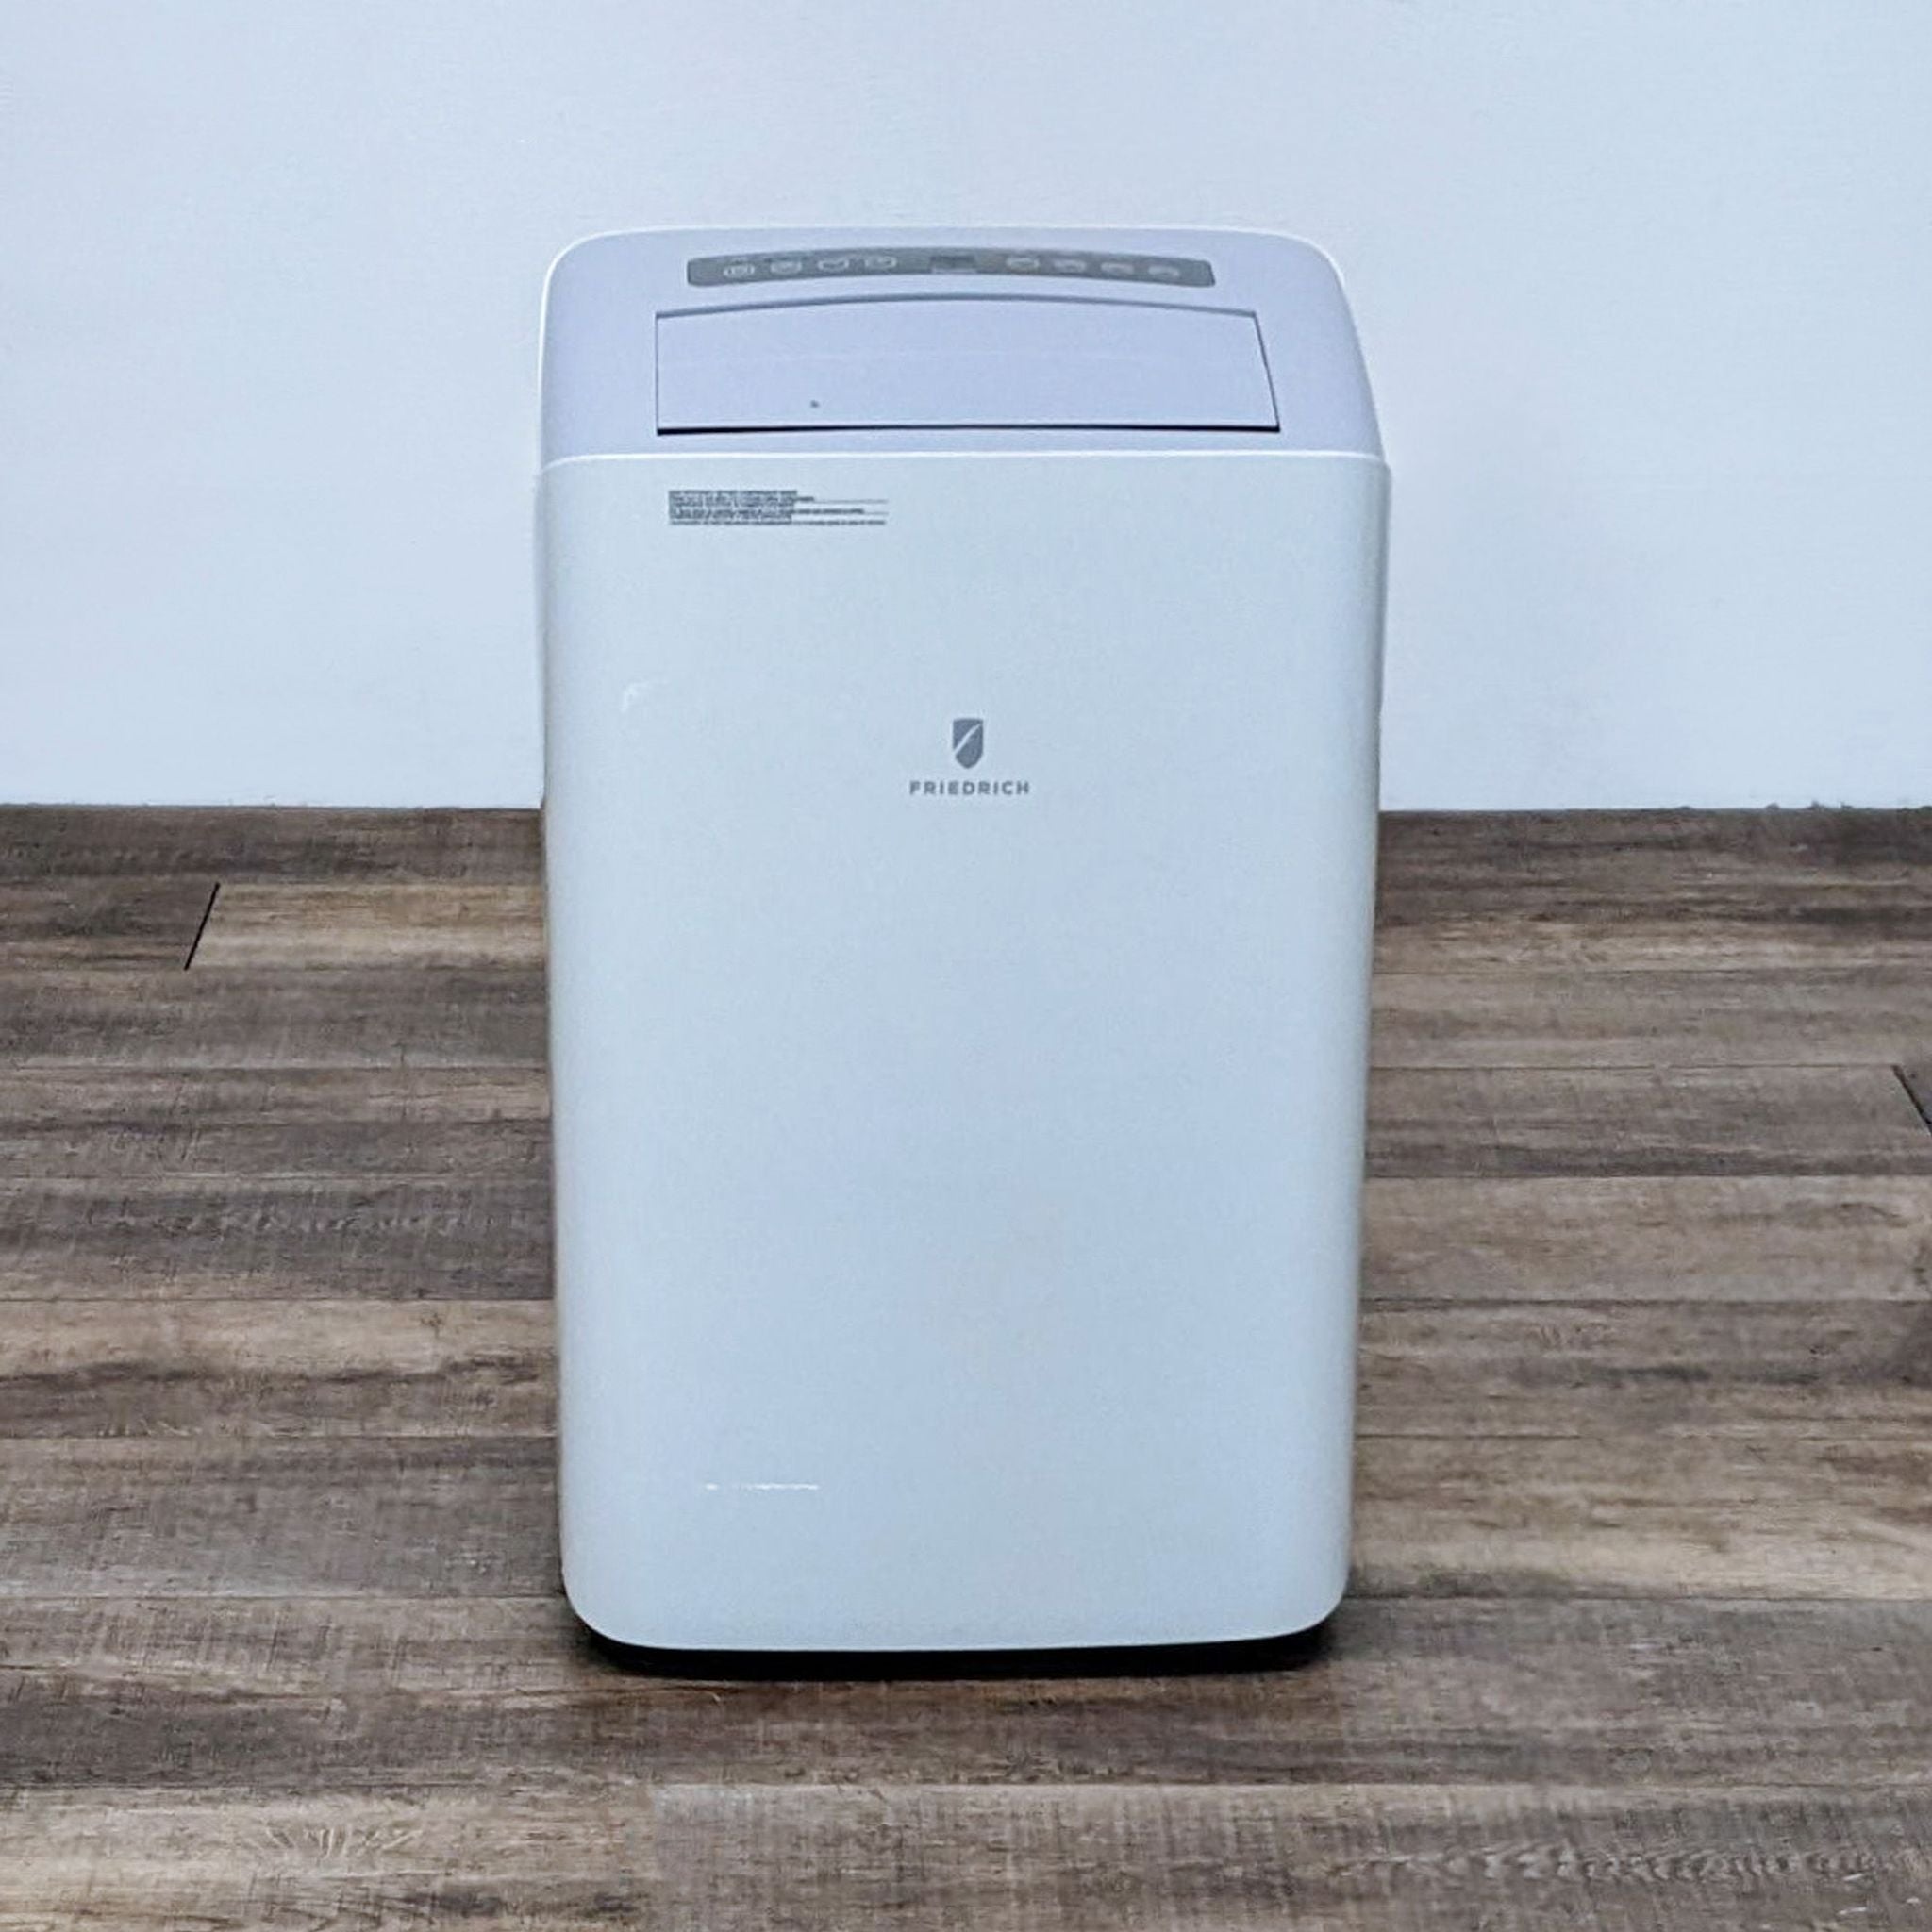 Alt text 1: Front view of a Friedrich portable air conditioner in a room with wooden flooring.